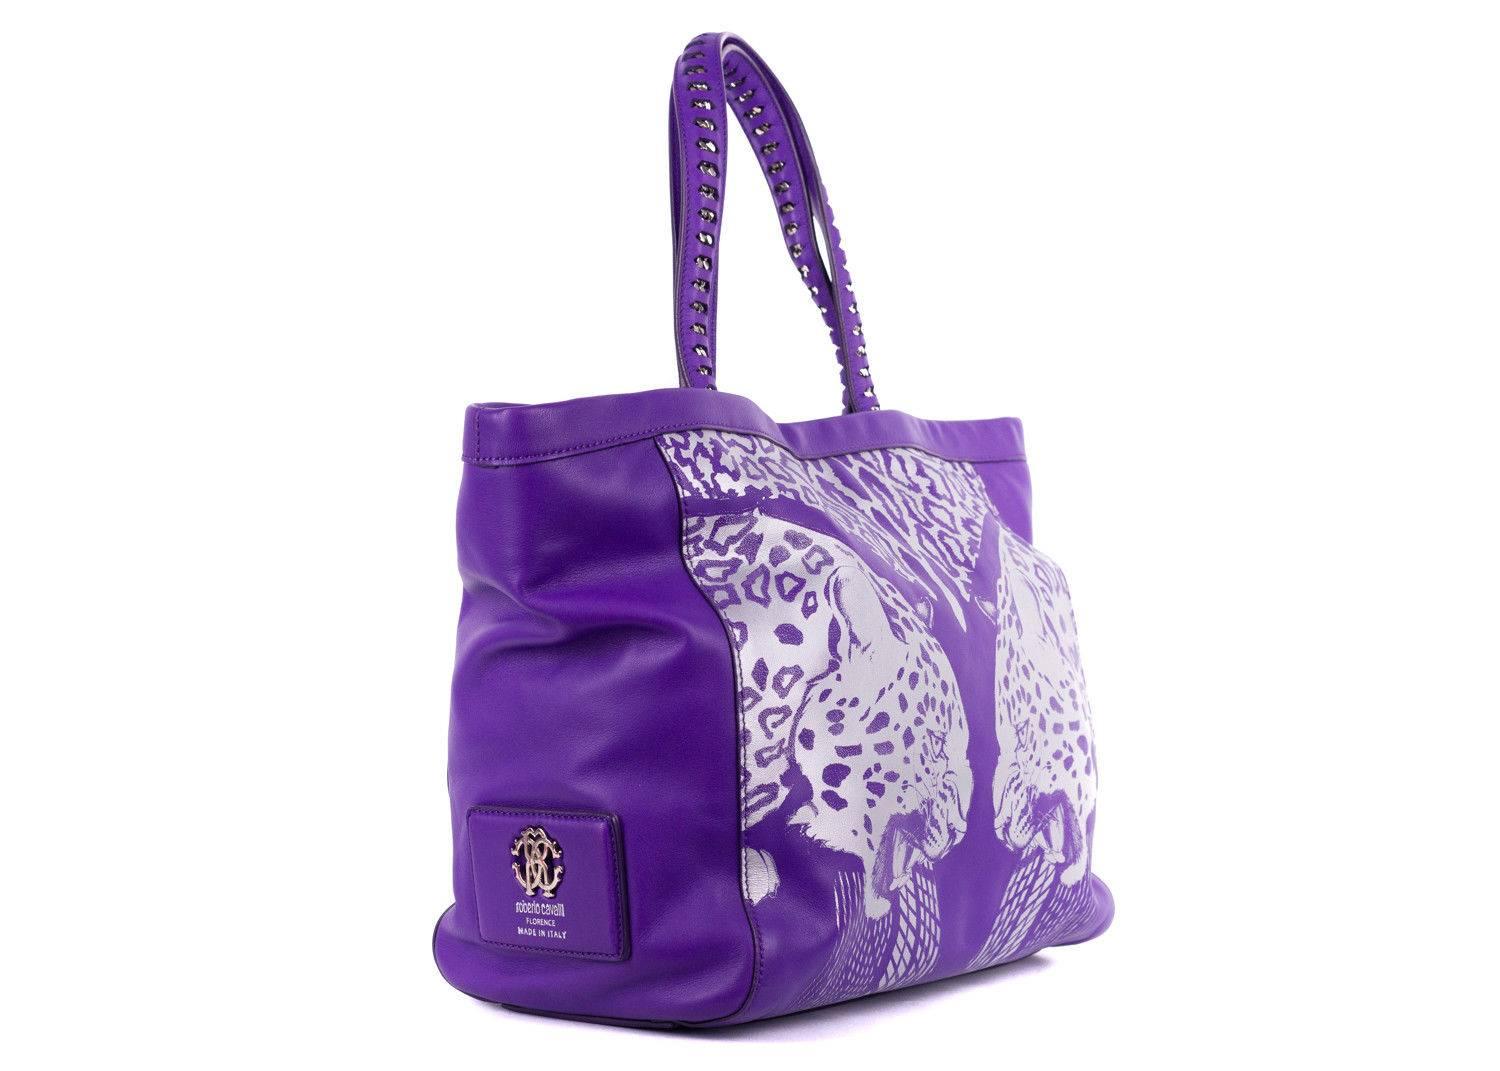 Roberto Cavalli purple leather tote bag. This tote bag features a silver metallic print with a tiger head and cheetah prints on top. This tote bag is perfect for some color in your wardrobe and this incoming summer season. Pair it with all white